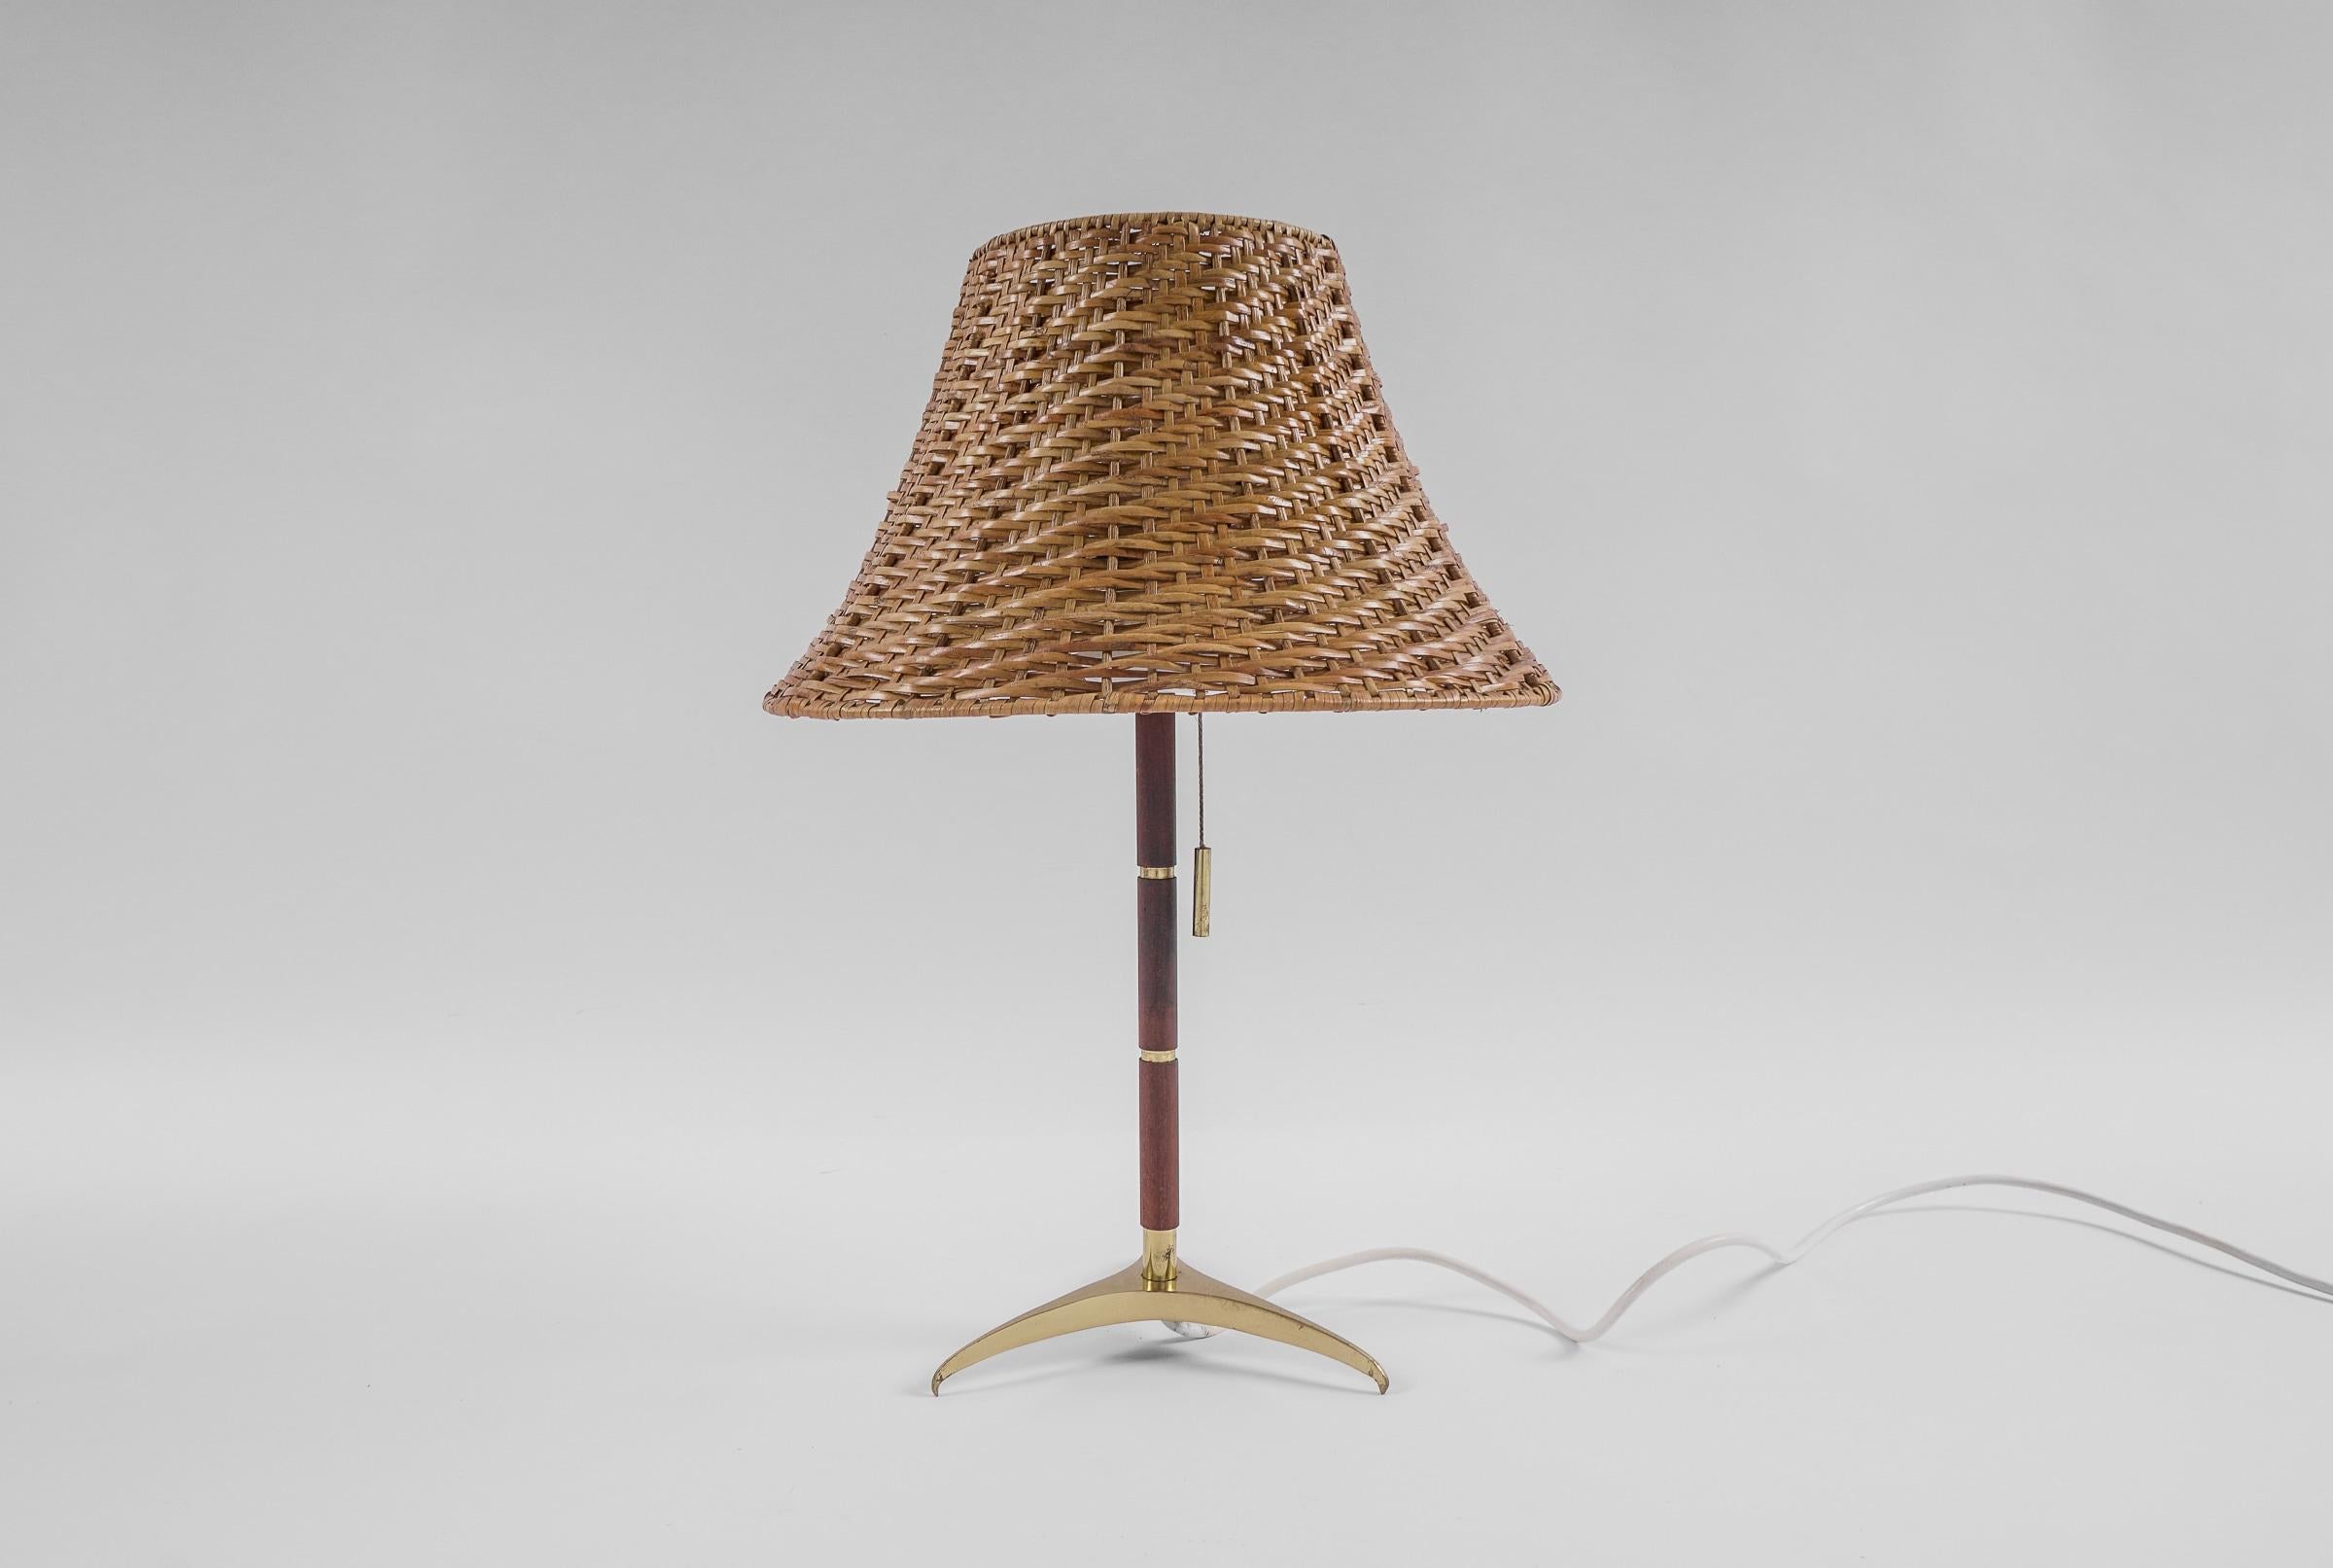 Lovely Mid-Century Modern Table Lamp in Brass, Wicker and Teak, 1950s, Austria For Sale 2